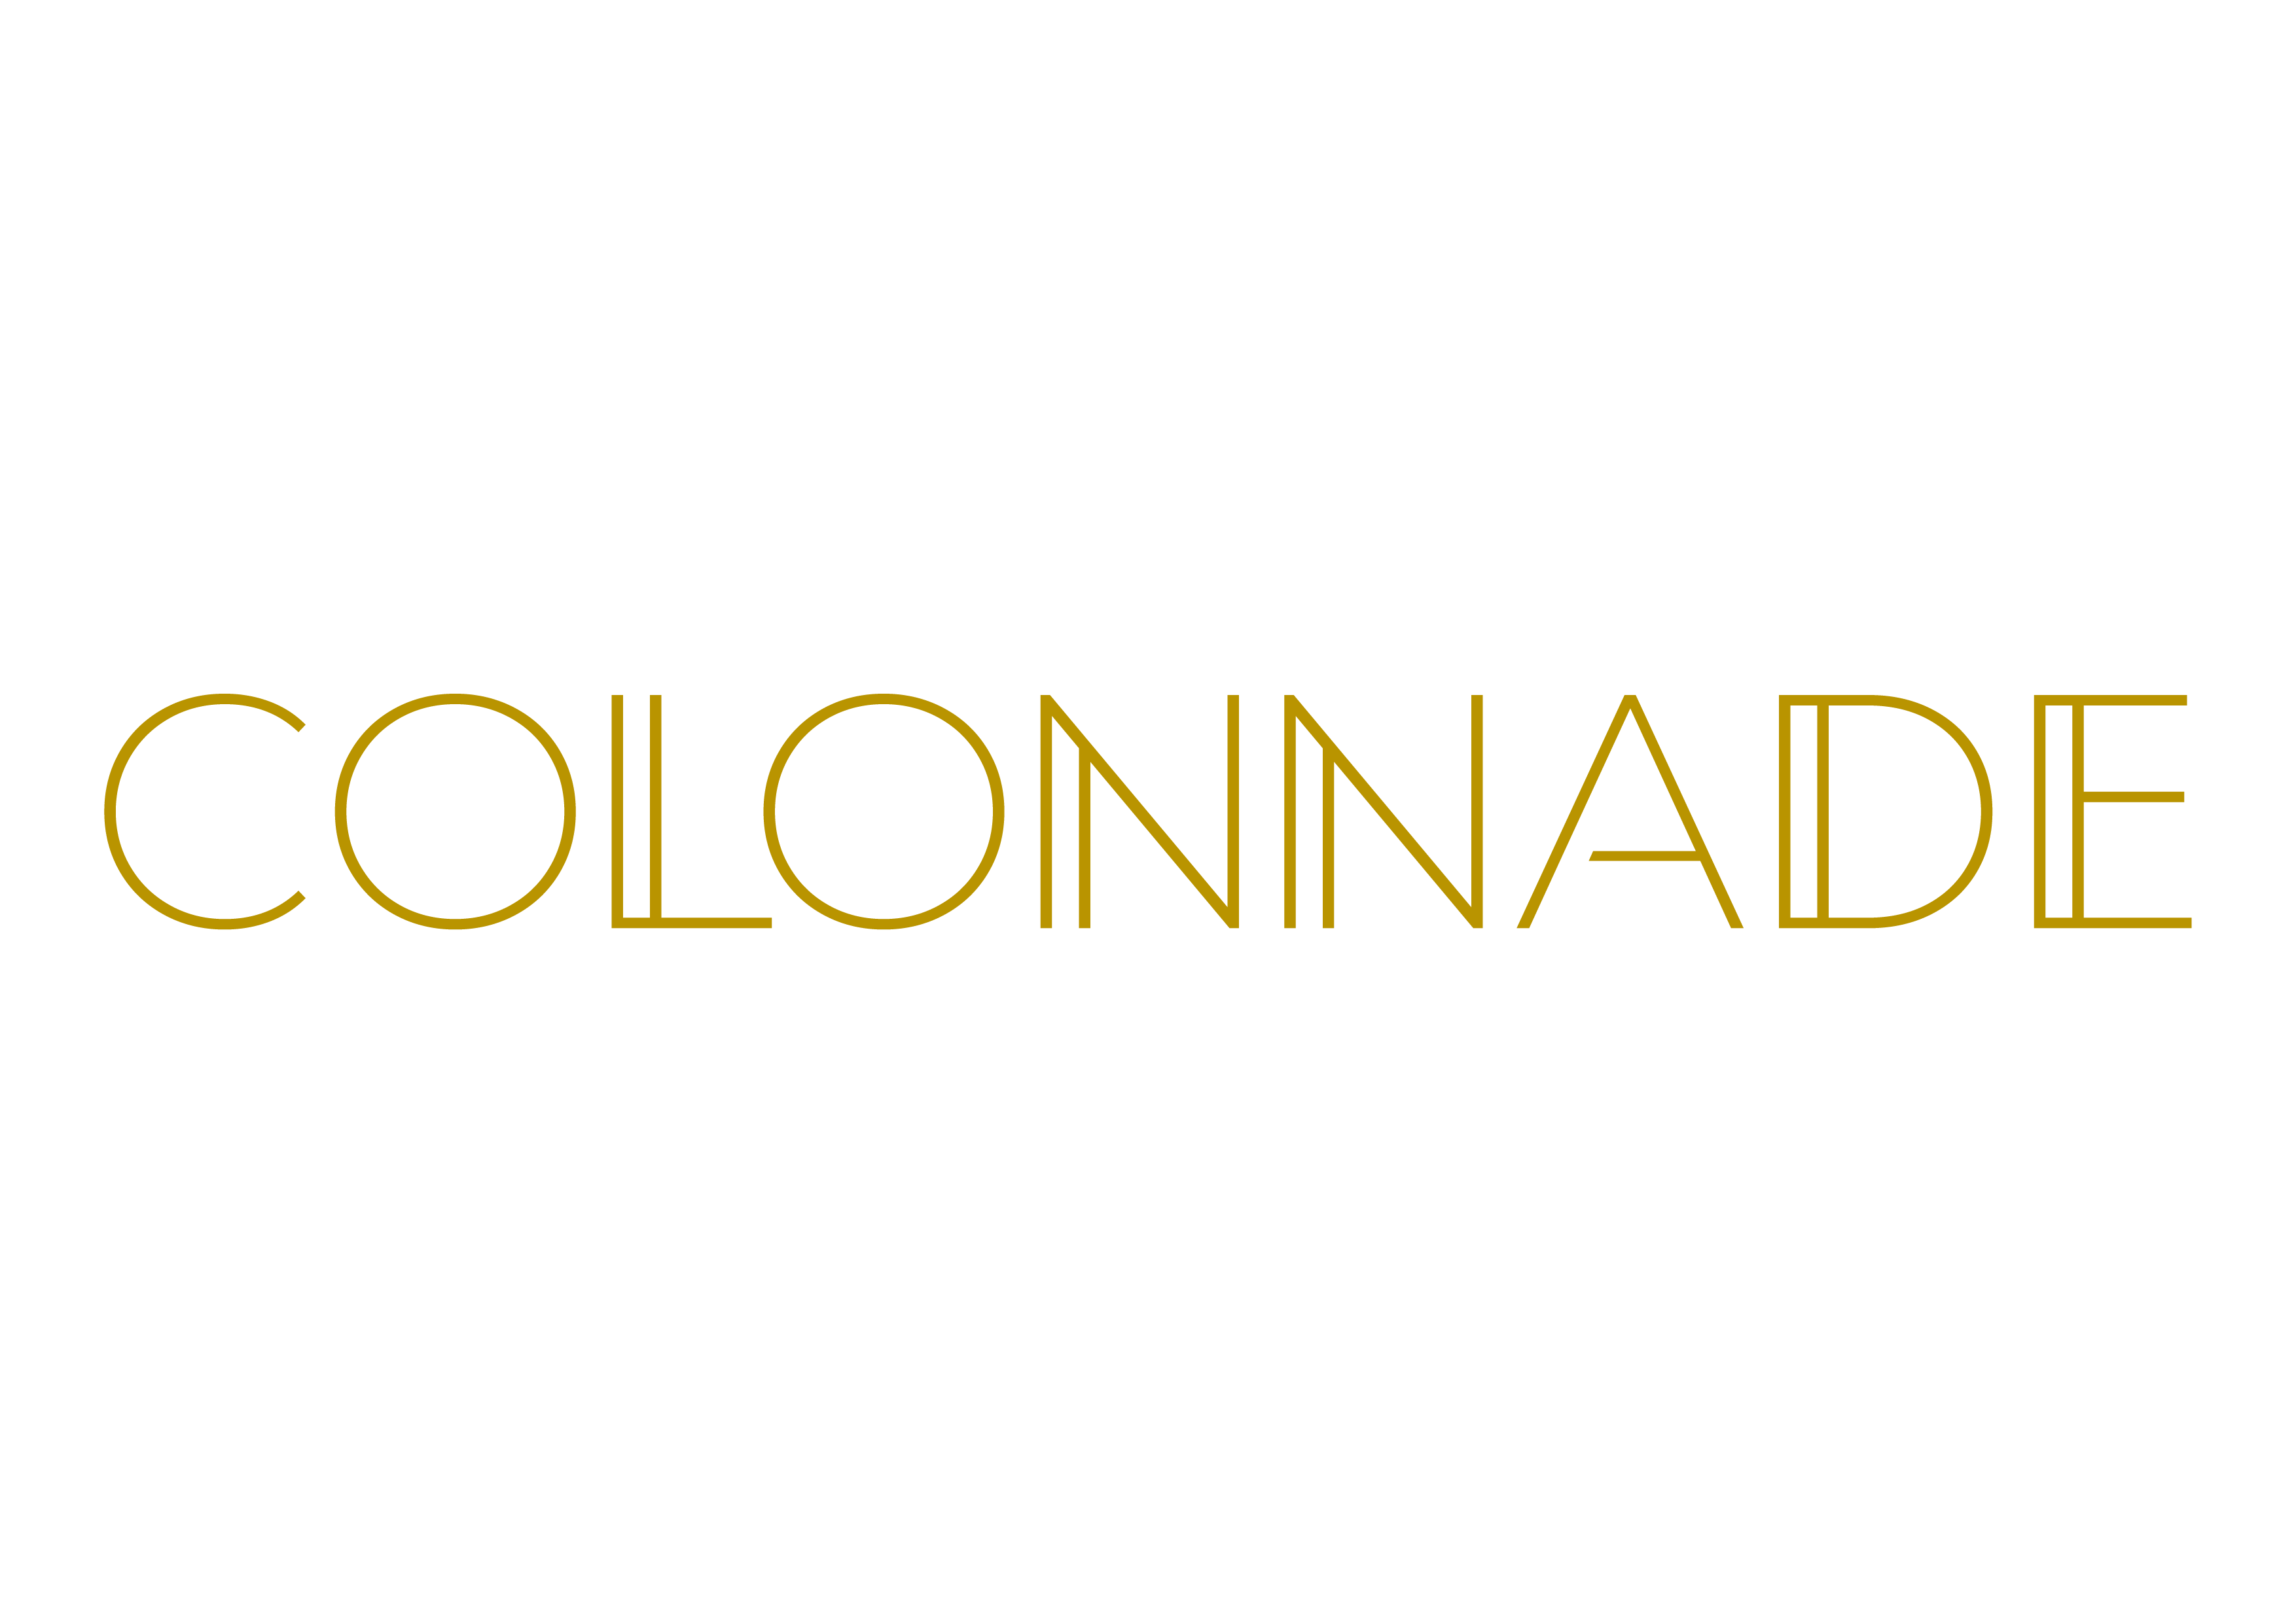 Colonnade (opening Q1 2023) Official Logo